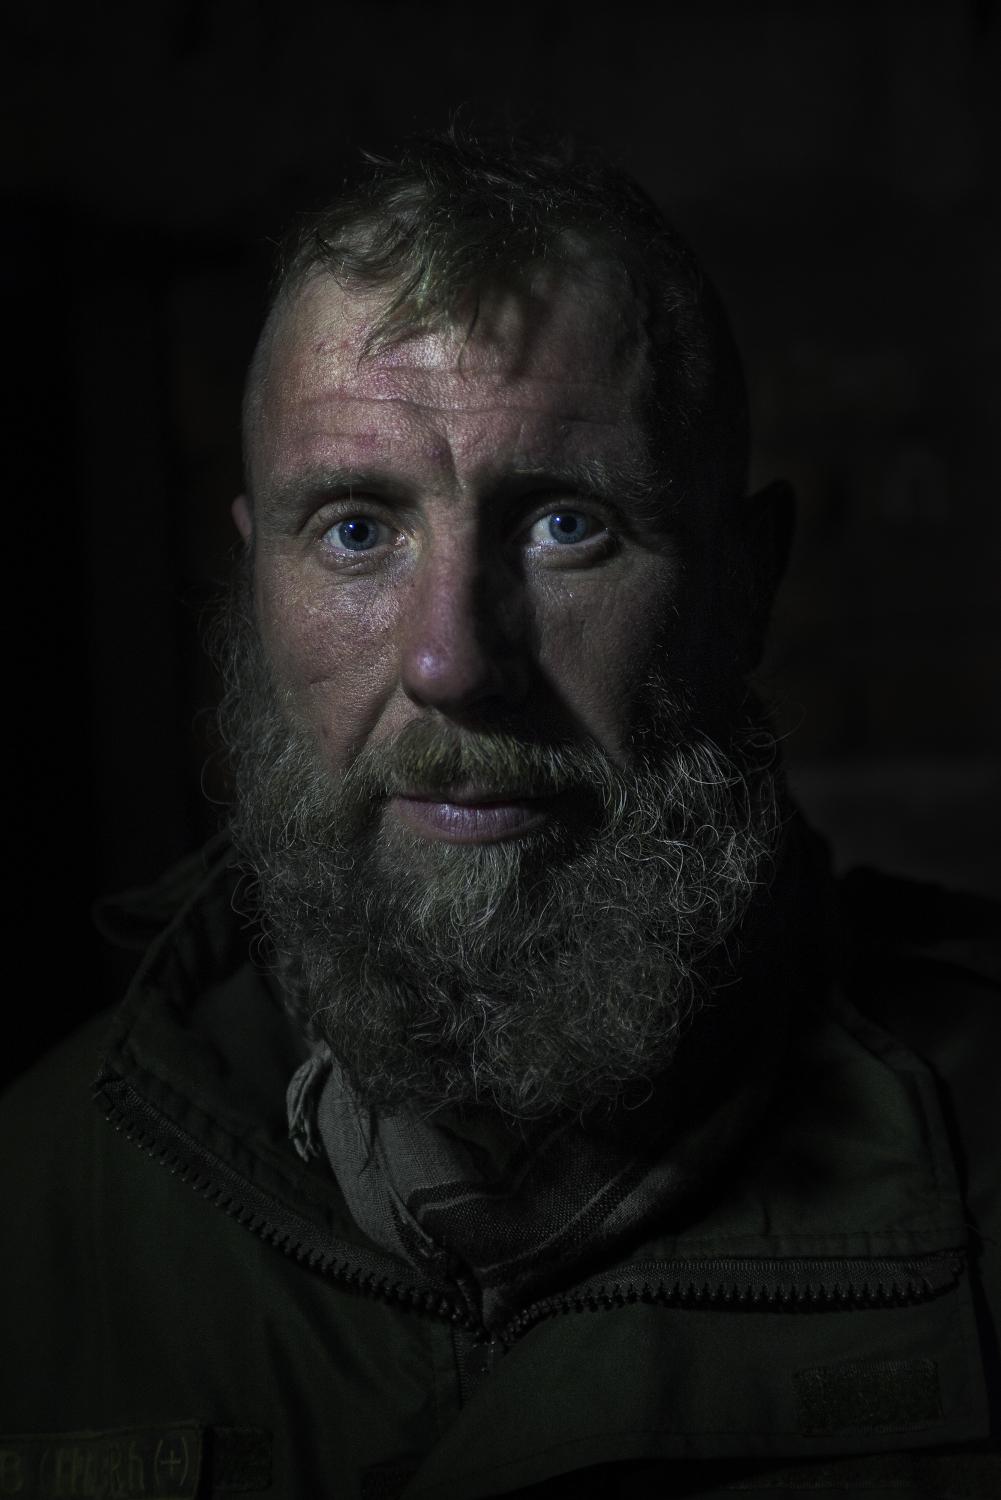 Under fire  - portraits on the front line of the war in Ukraine